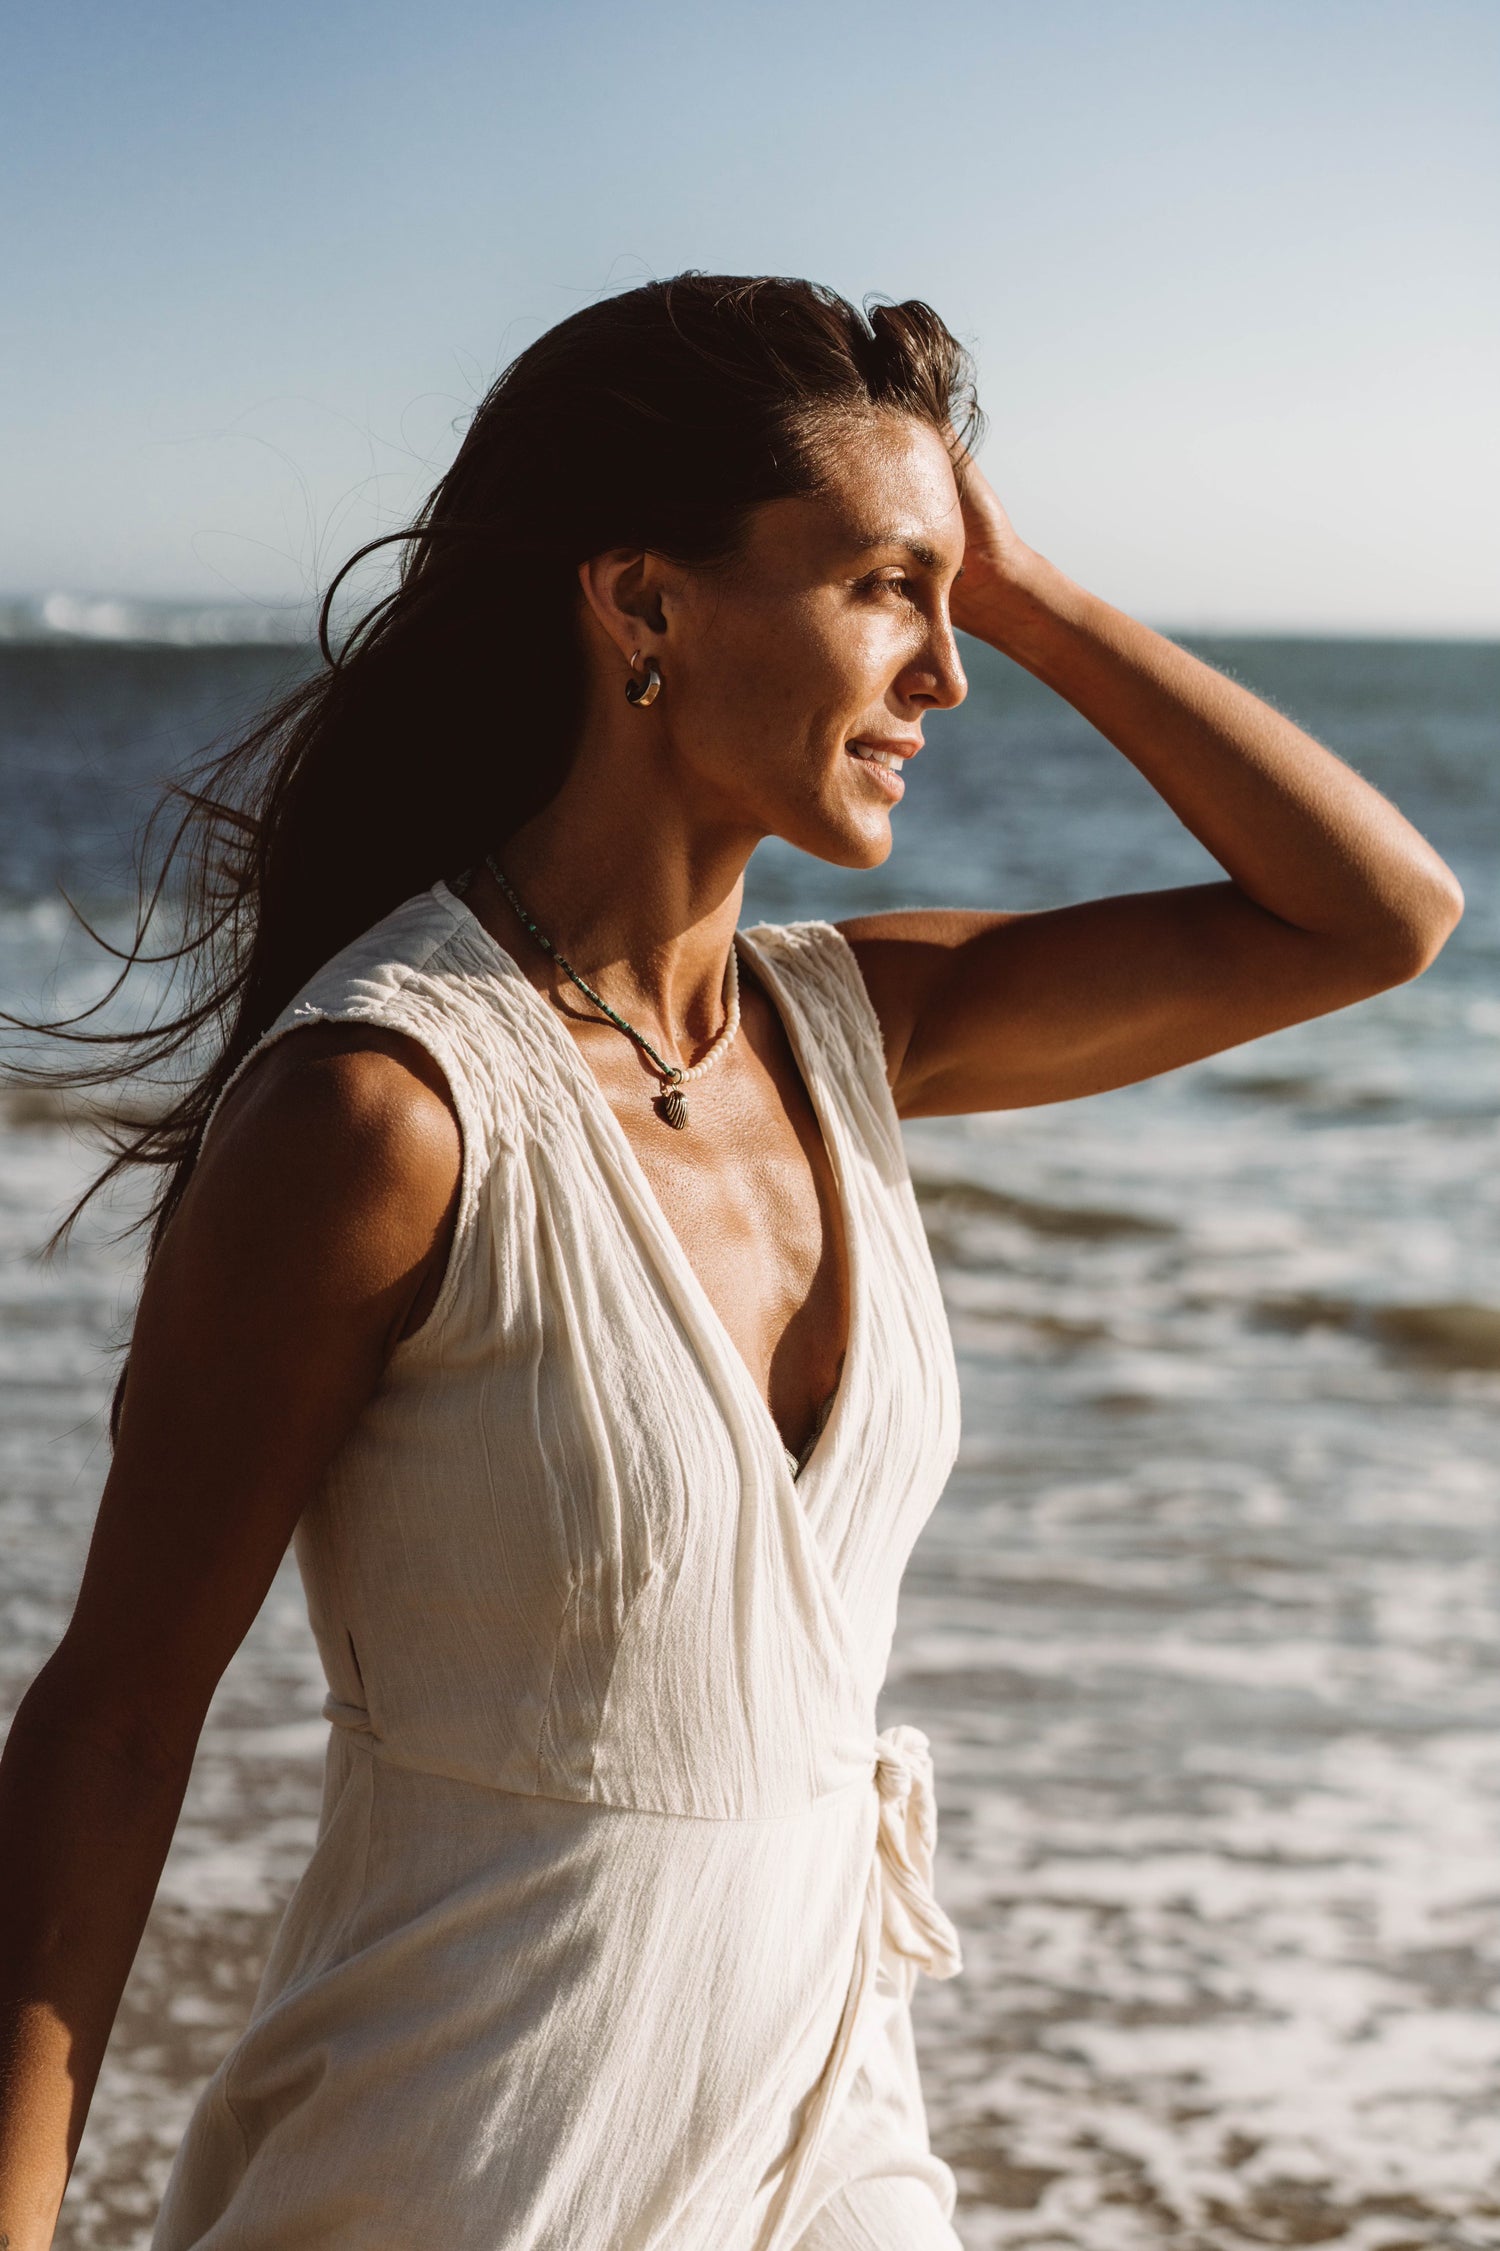 Land & Sea necklace. Made with bronze pendant, turquoise beads, and coral beads. Model in white dress at beach. 